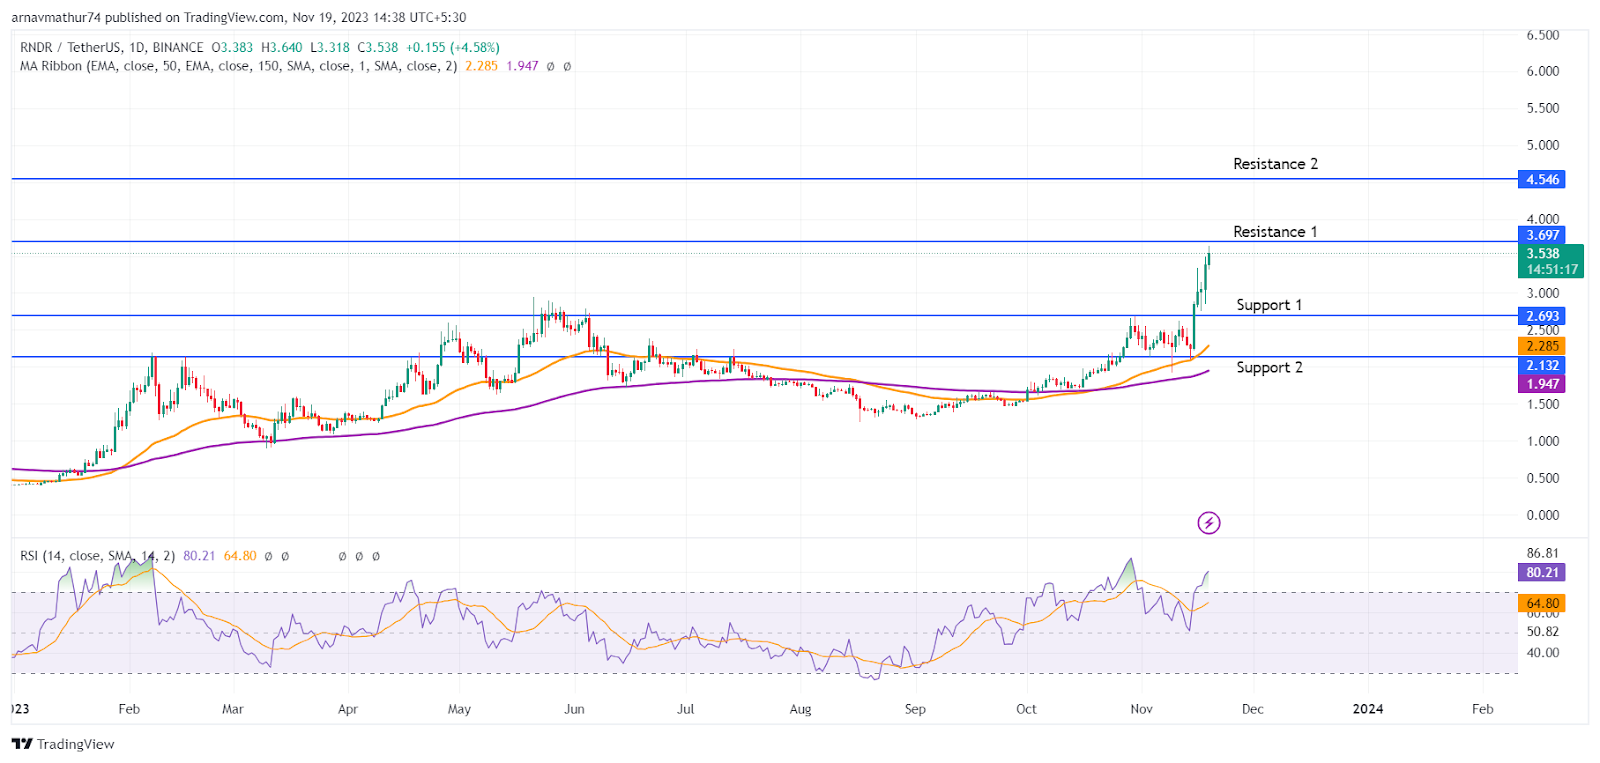 RNDR Coin Analysis: Bulls Surged 60% in 5 Days, What’s Ahead?